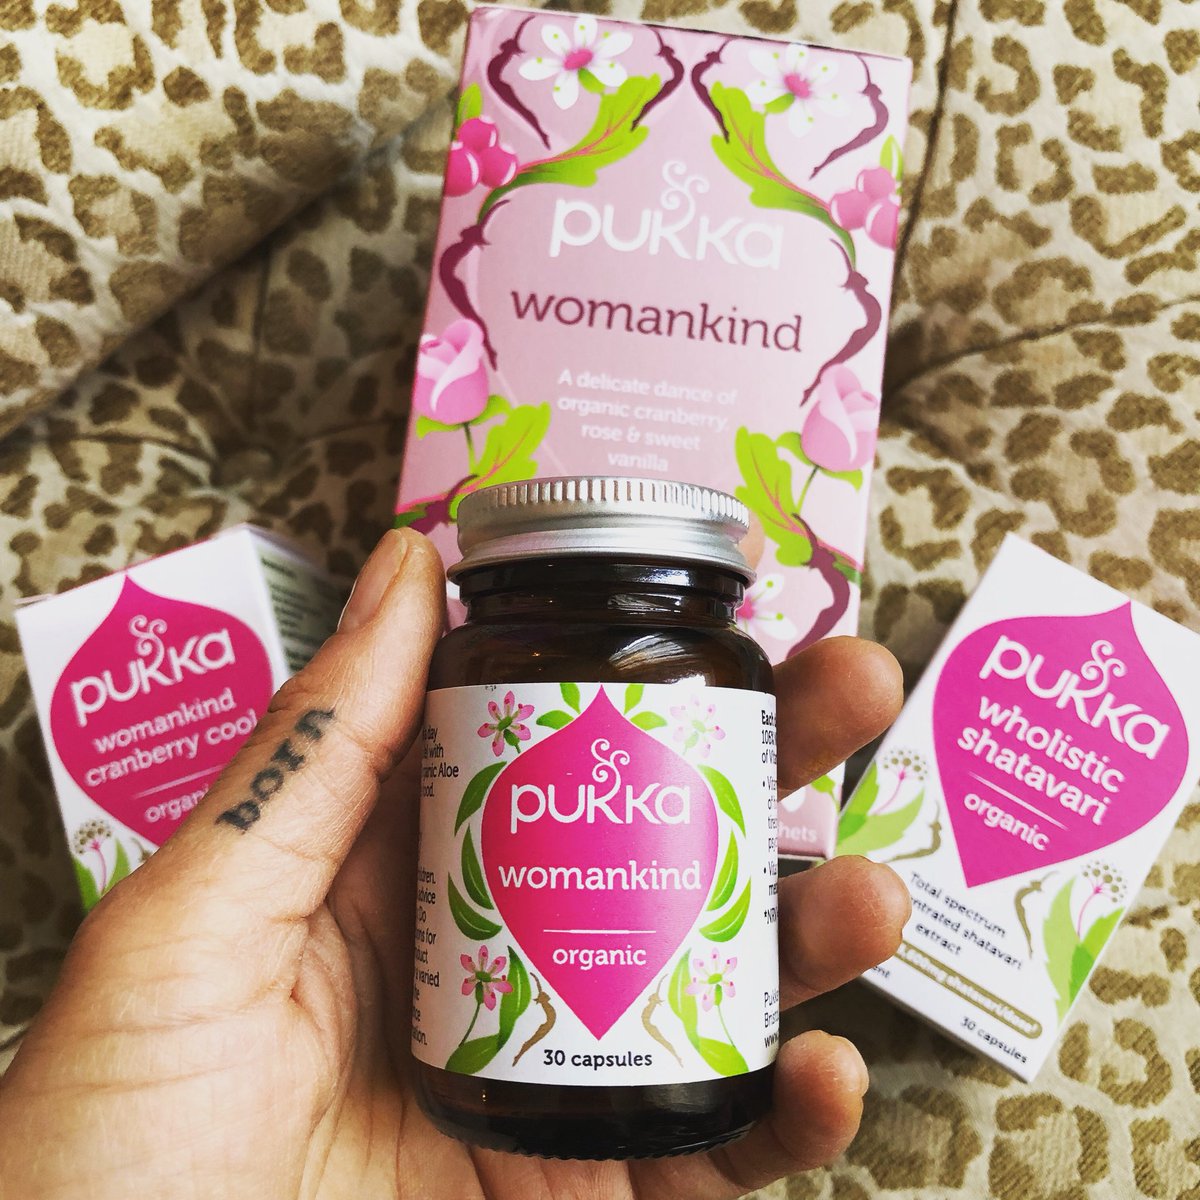 Totes part of my current healthcare regime. Thank you @pukkaherbs for crafting this beautiful Women’s Range x T https://t.co/T16339noUc